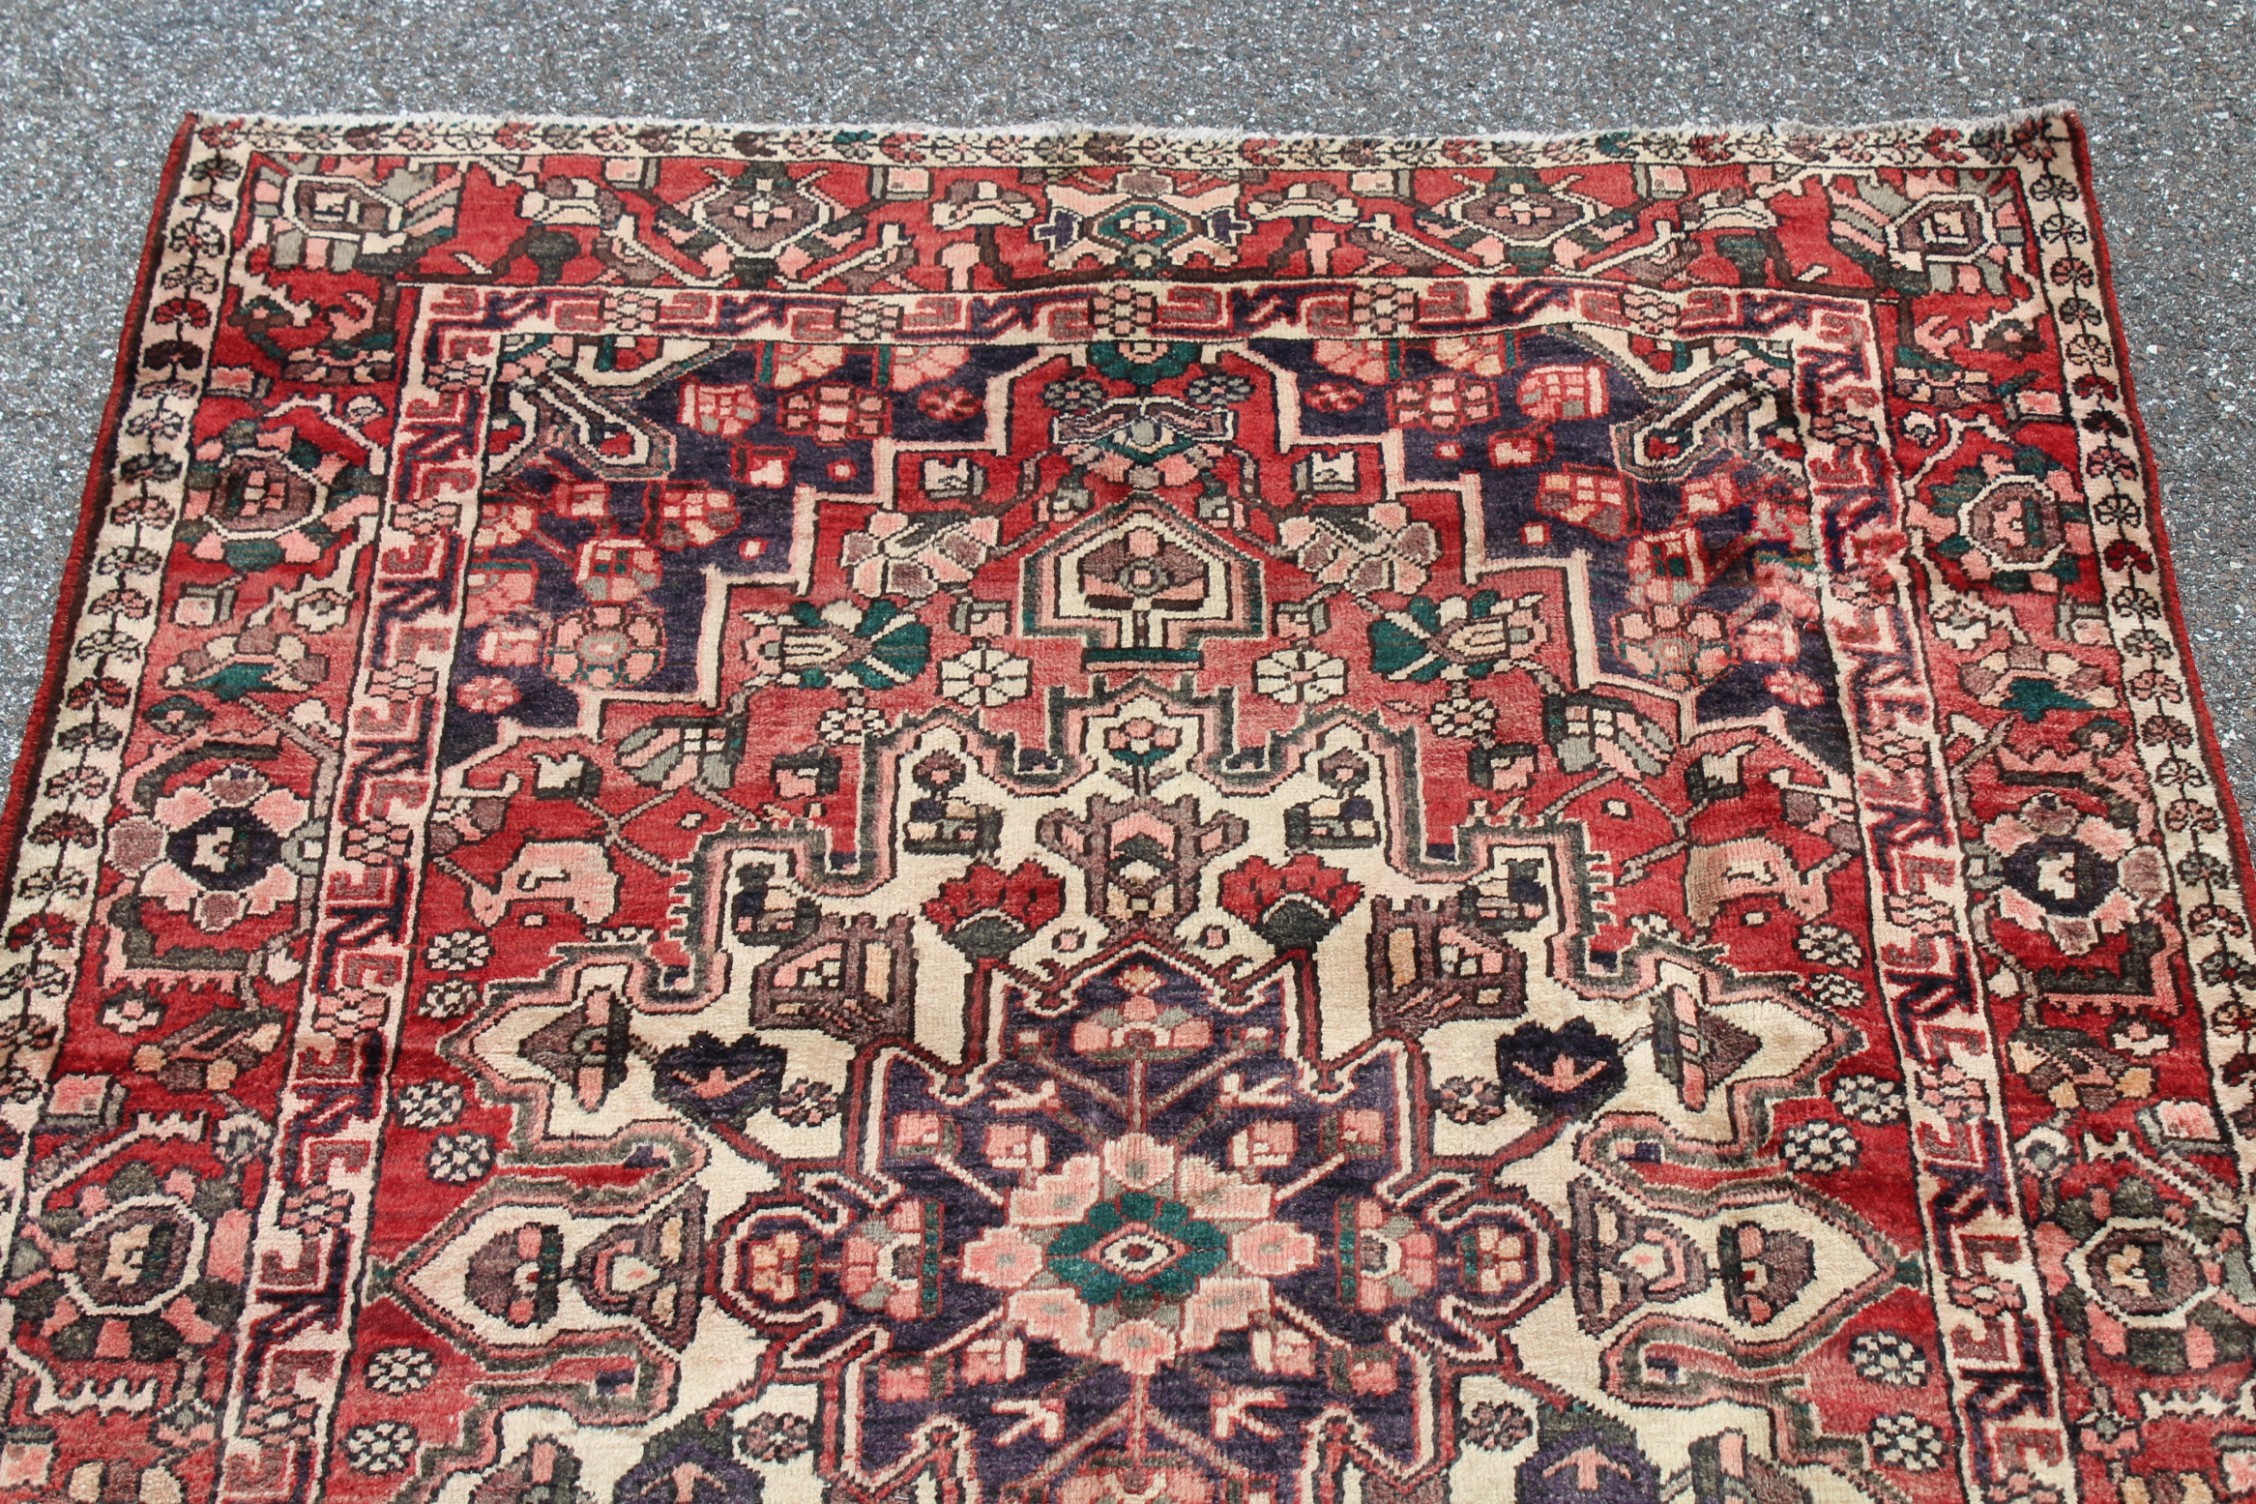 Heriz Hand-Knotted Persian Wool Rug - 5'5" x 8' - Image 5 of 12